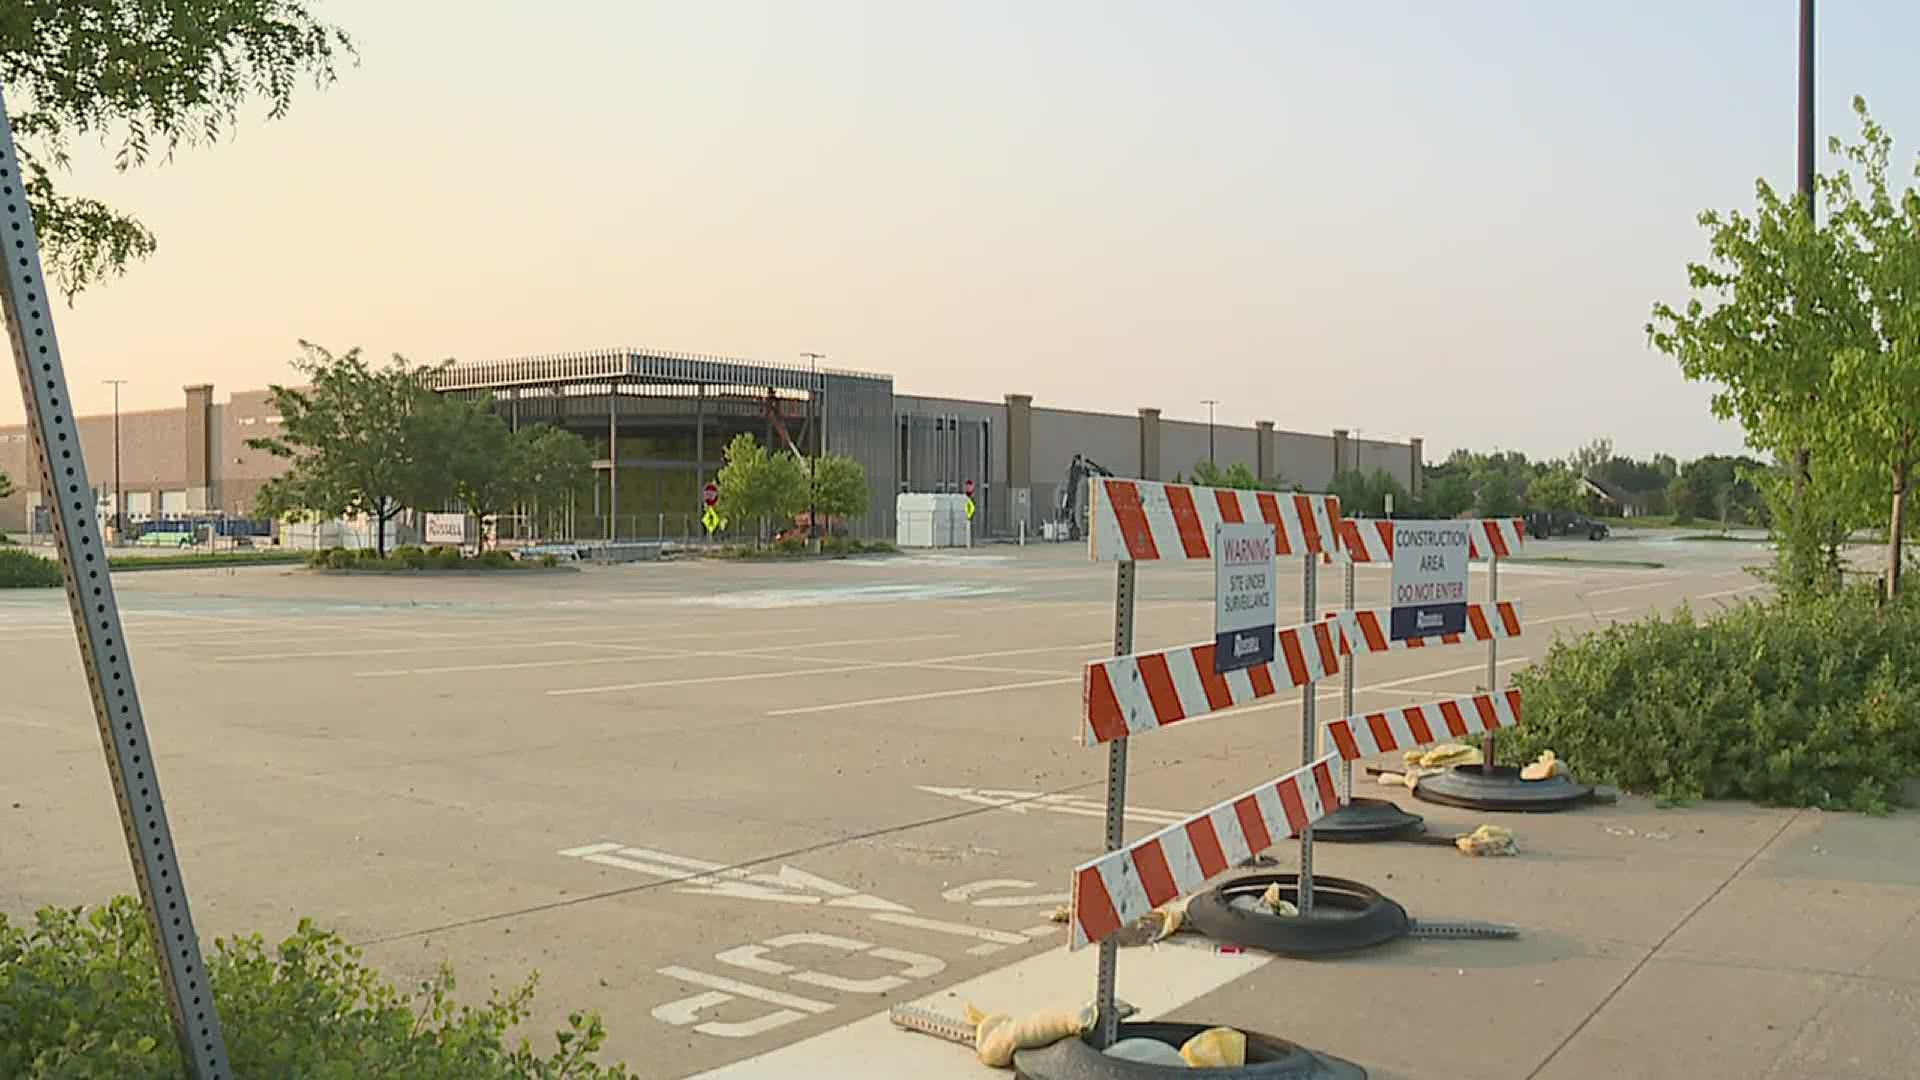 They're expanding by moving into the old Sam's Club in Moline